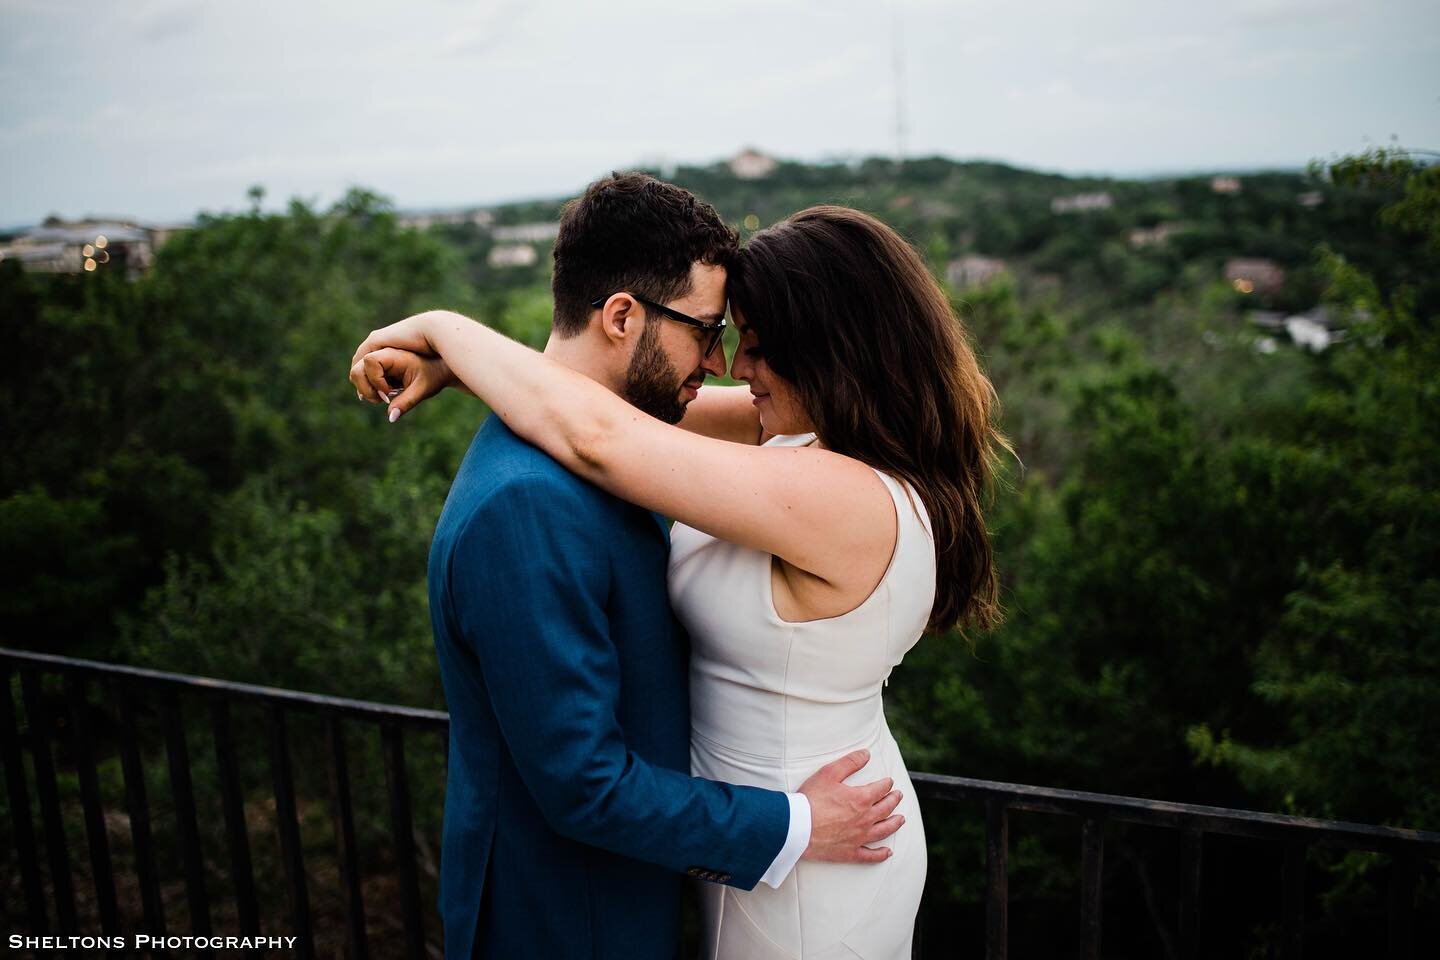 Shawn + Shannon 5.22.21

This amazing ATX wedding was sooo lit. So thankful I got to capture it for my old pal, Shawn, and my newer pal, Shannon. Love these two! 

Check out my FB page for much  more😁